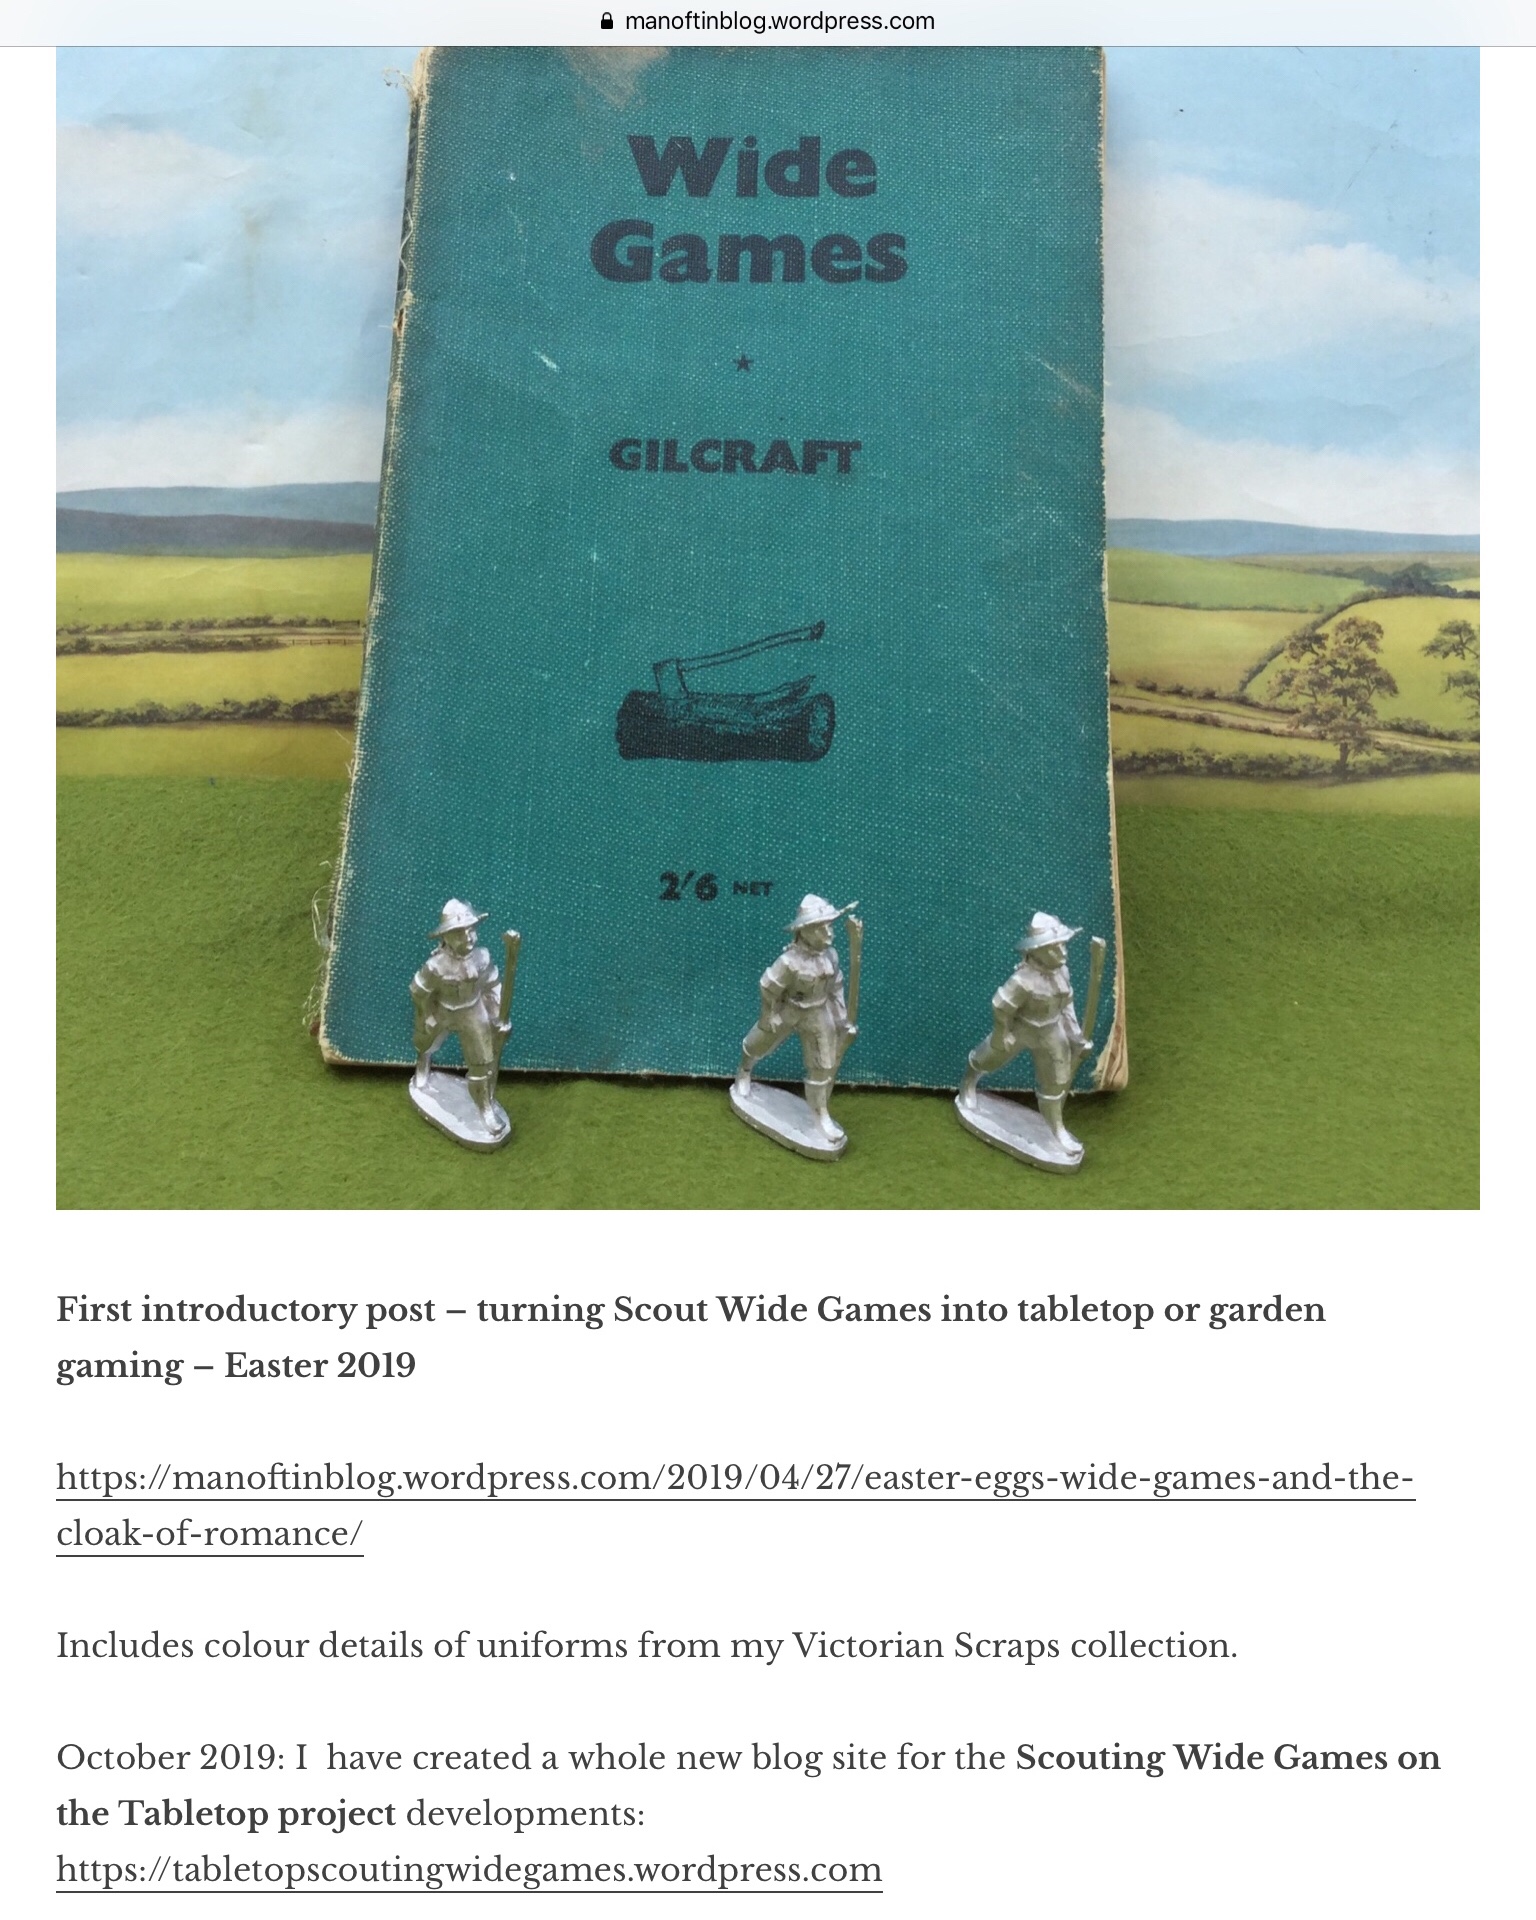 42mm – Scouting Wide Games for the Tabletop and Garden